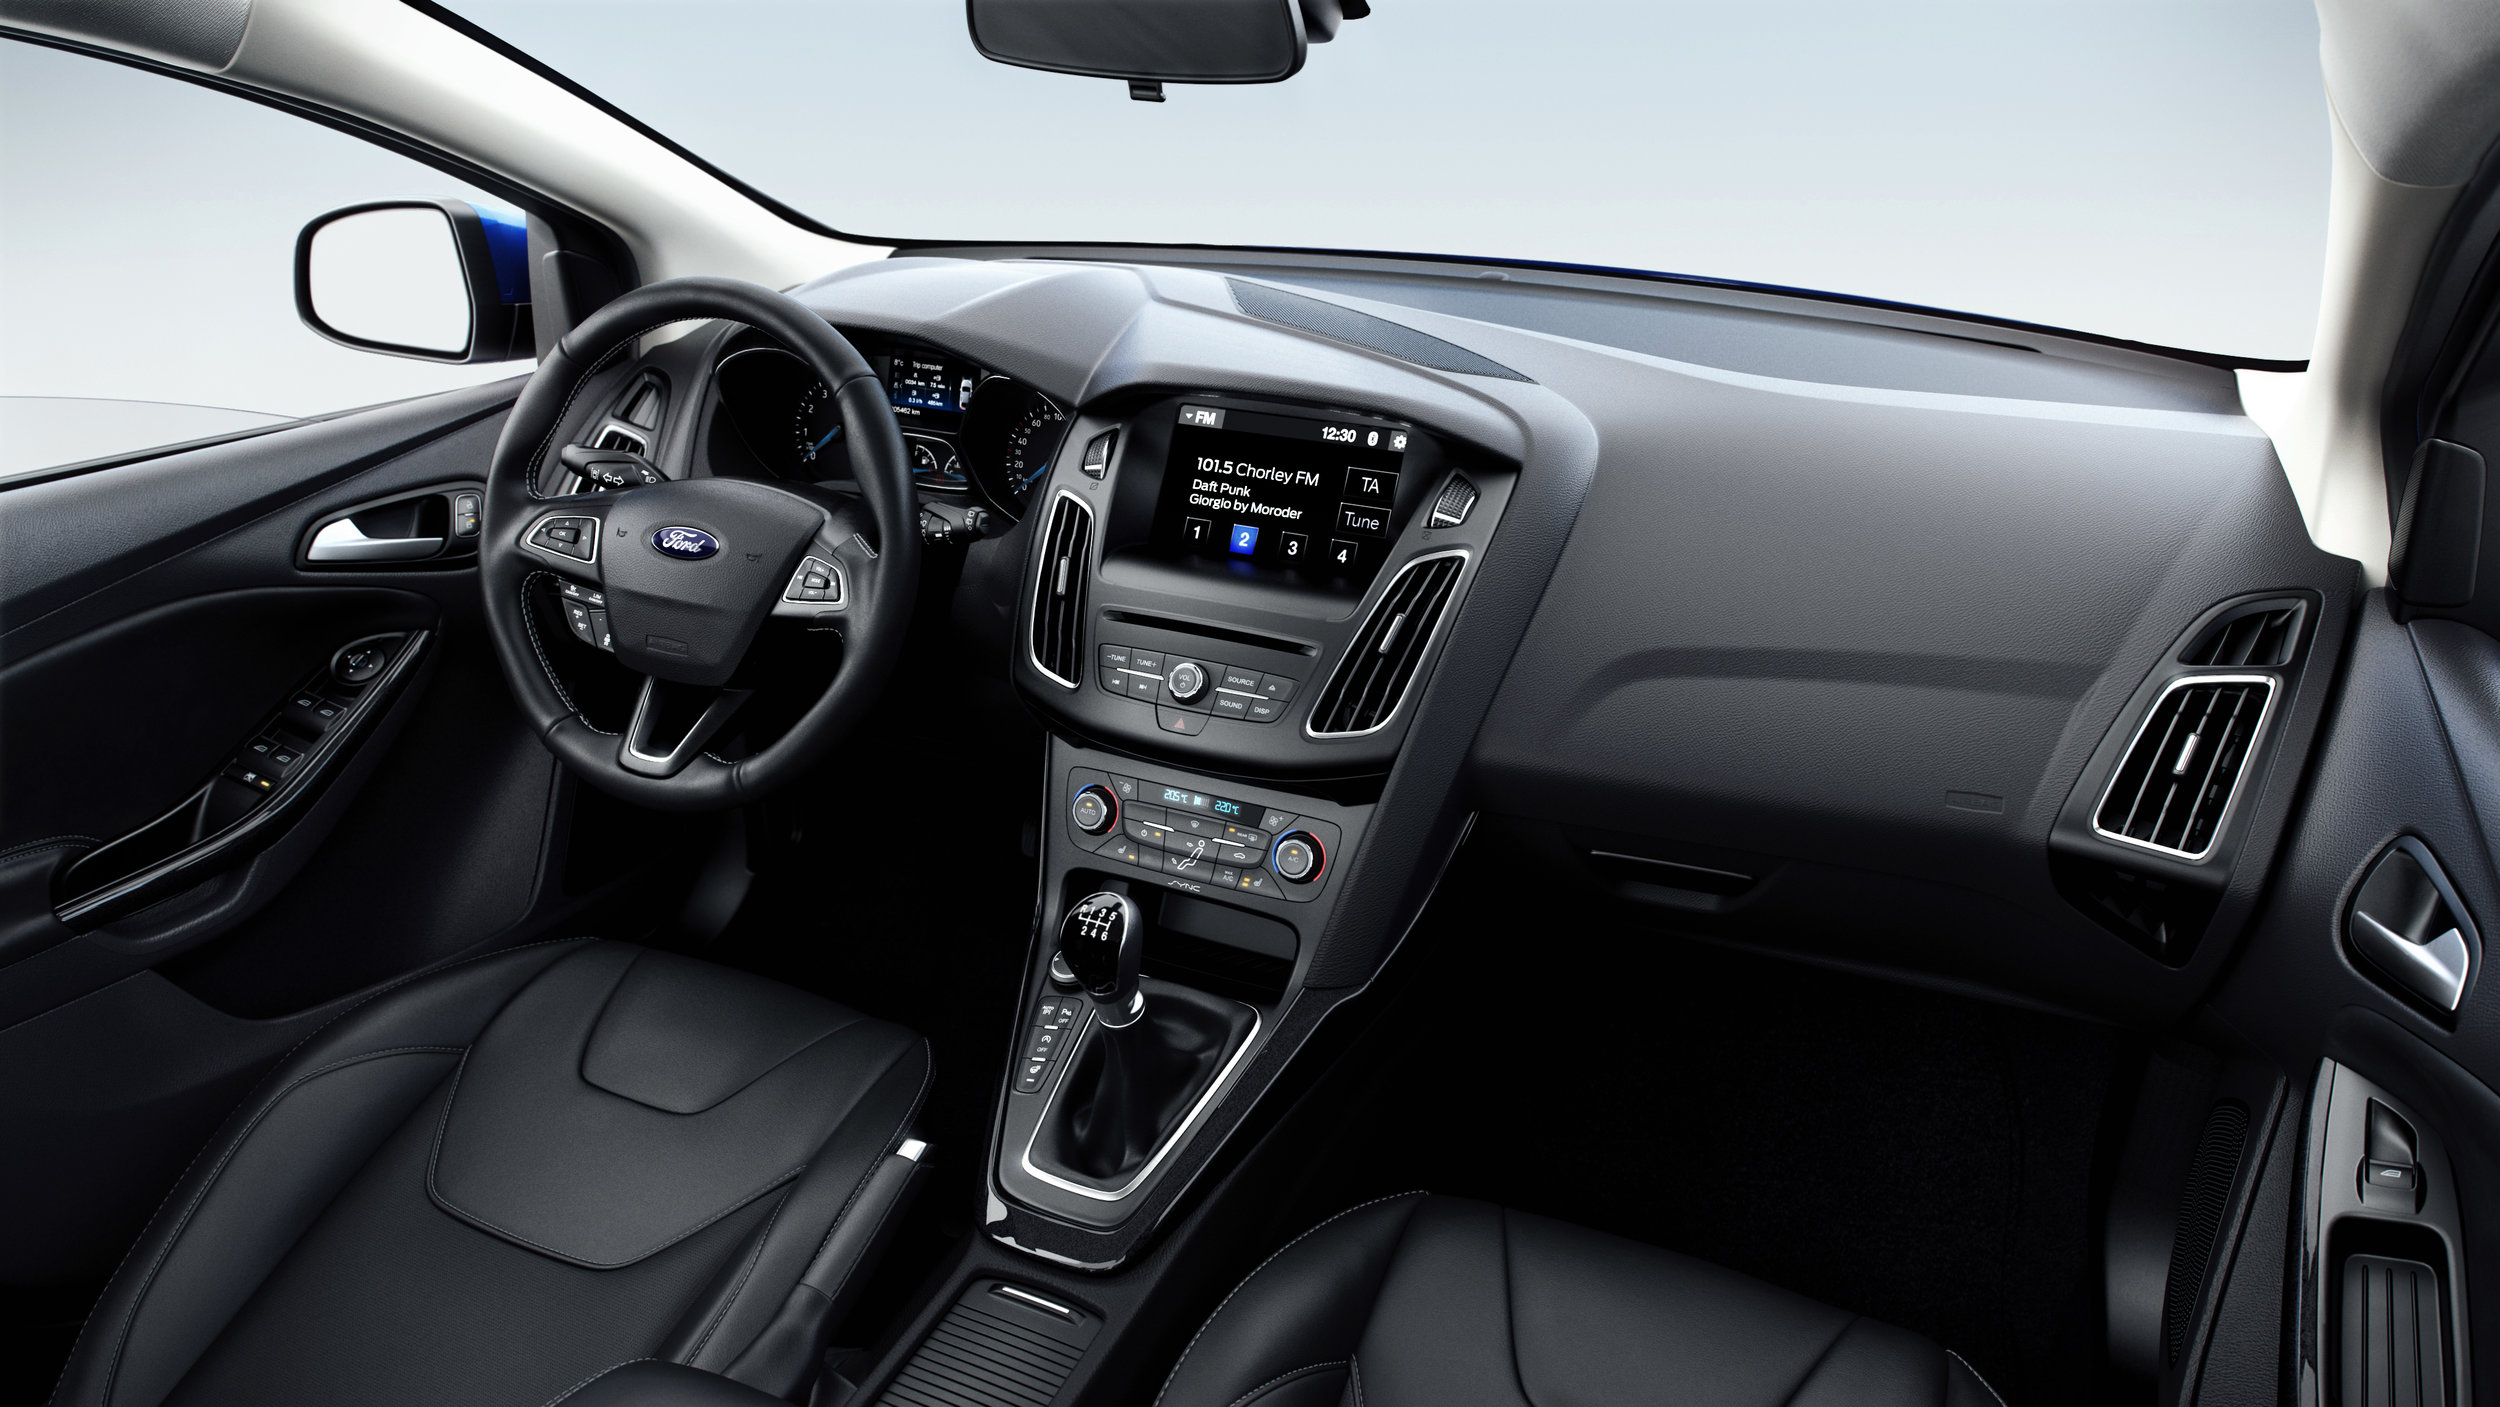 Ford Focus St Interior Aw